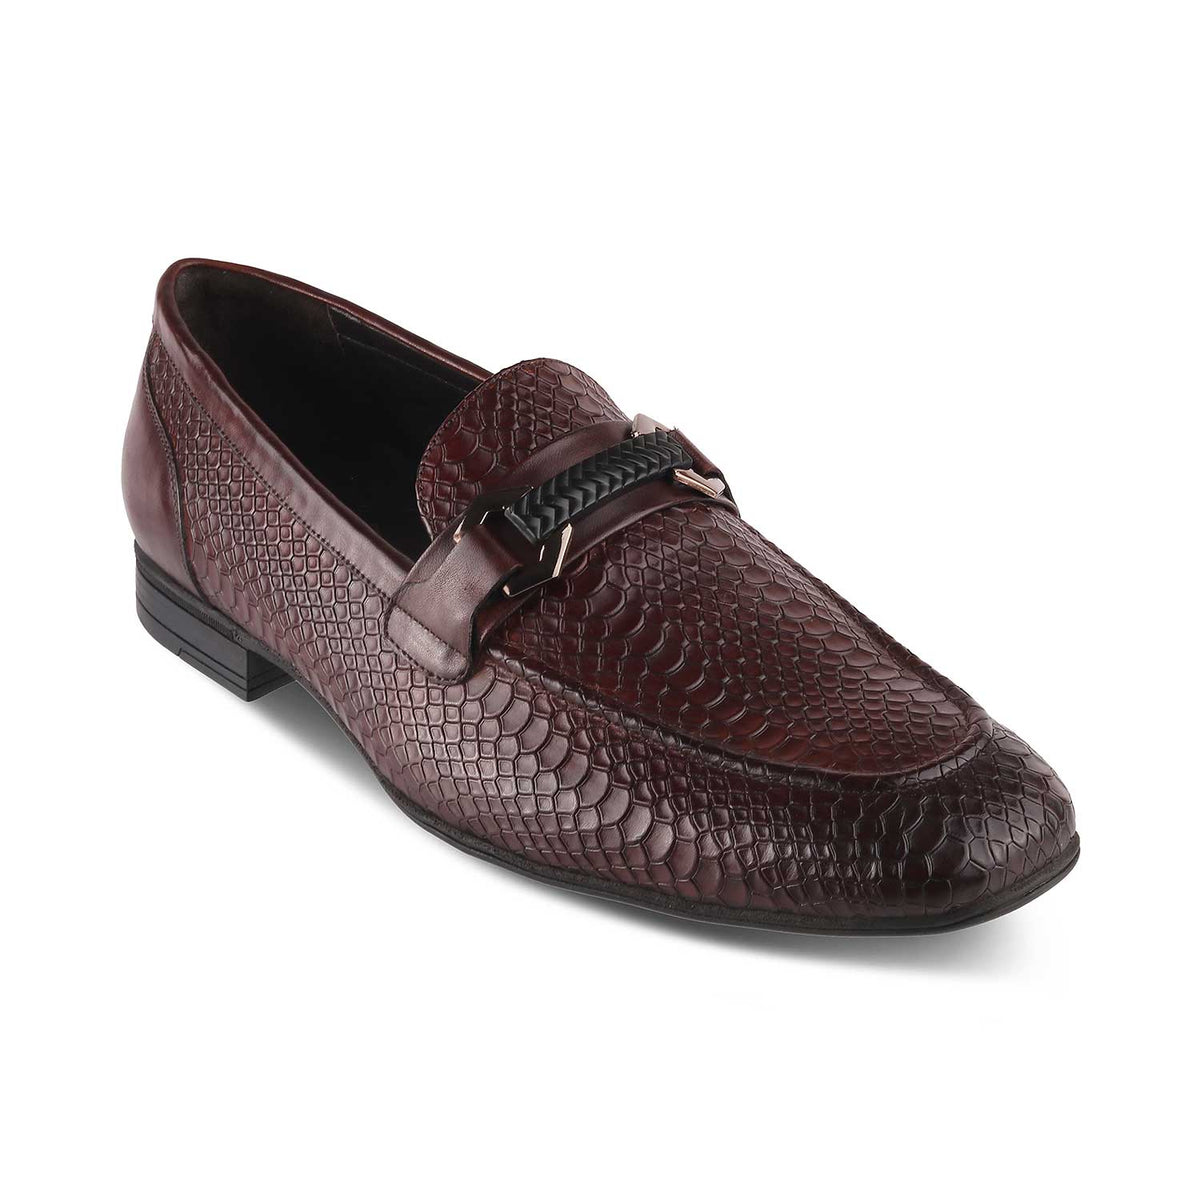 The Cytom Tan Men's Leather Loafers - Tresmode